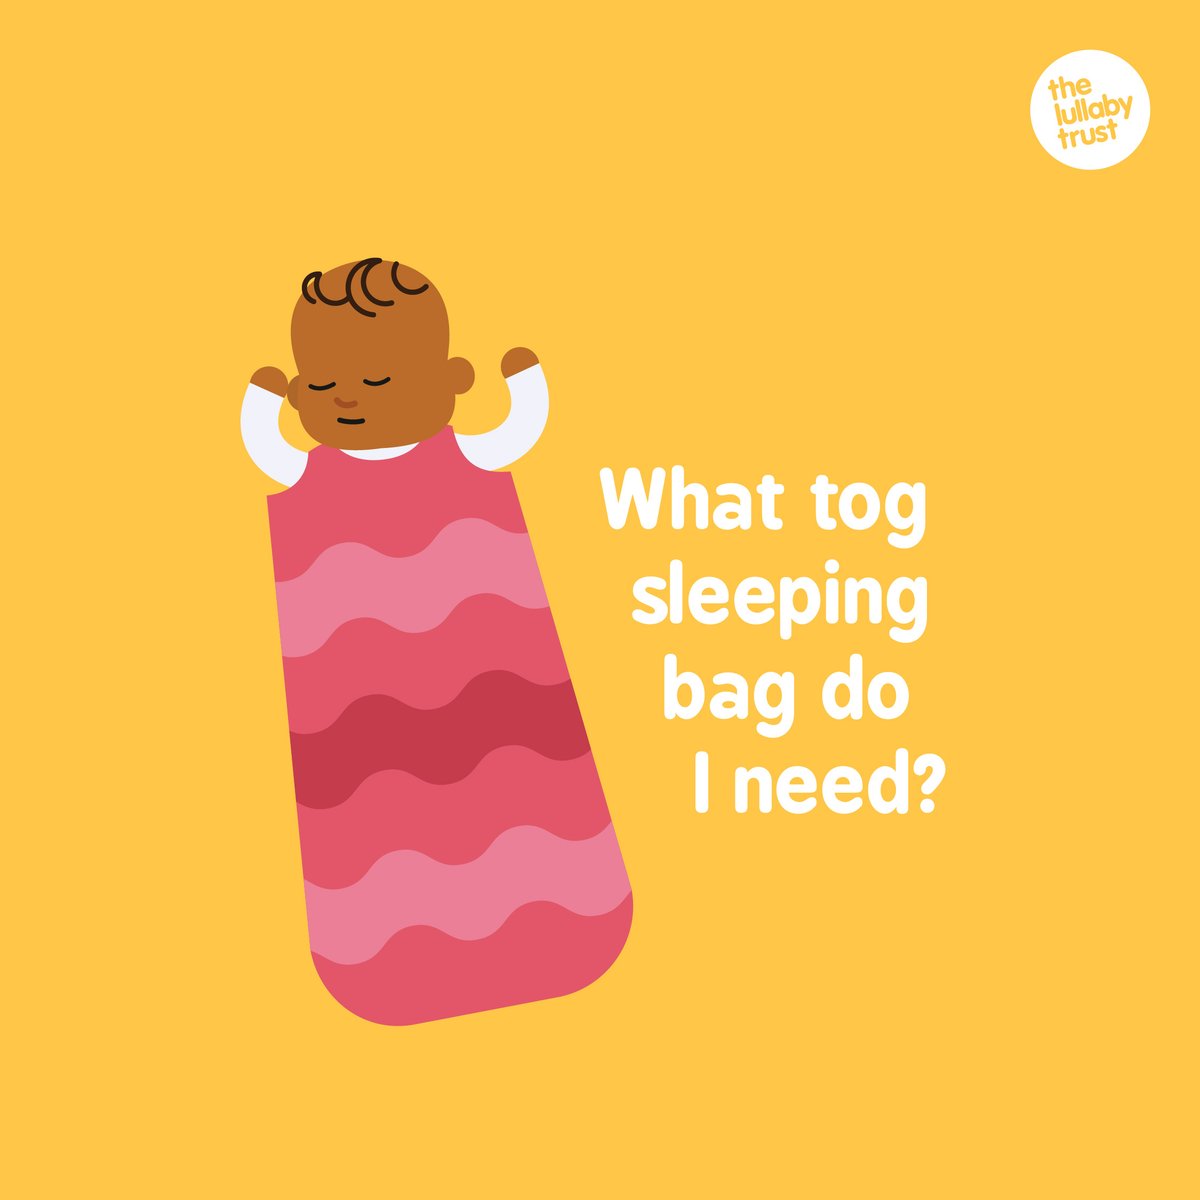 SLEEPING BAGS – Baby sleep bags are a good alternative to using blankets. The “tog” of the sleeping bag tells you how much heat will be kept inside – the higher the tog, the warmer baby will get. Check manufacturers guidelines on how to tell if the bag fits well.